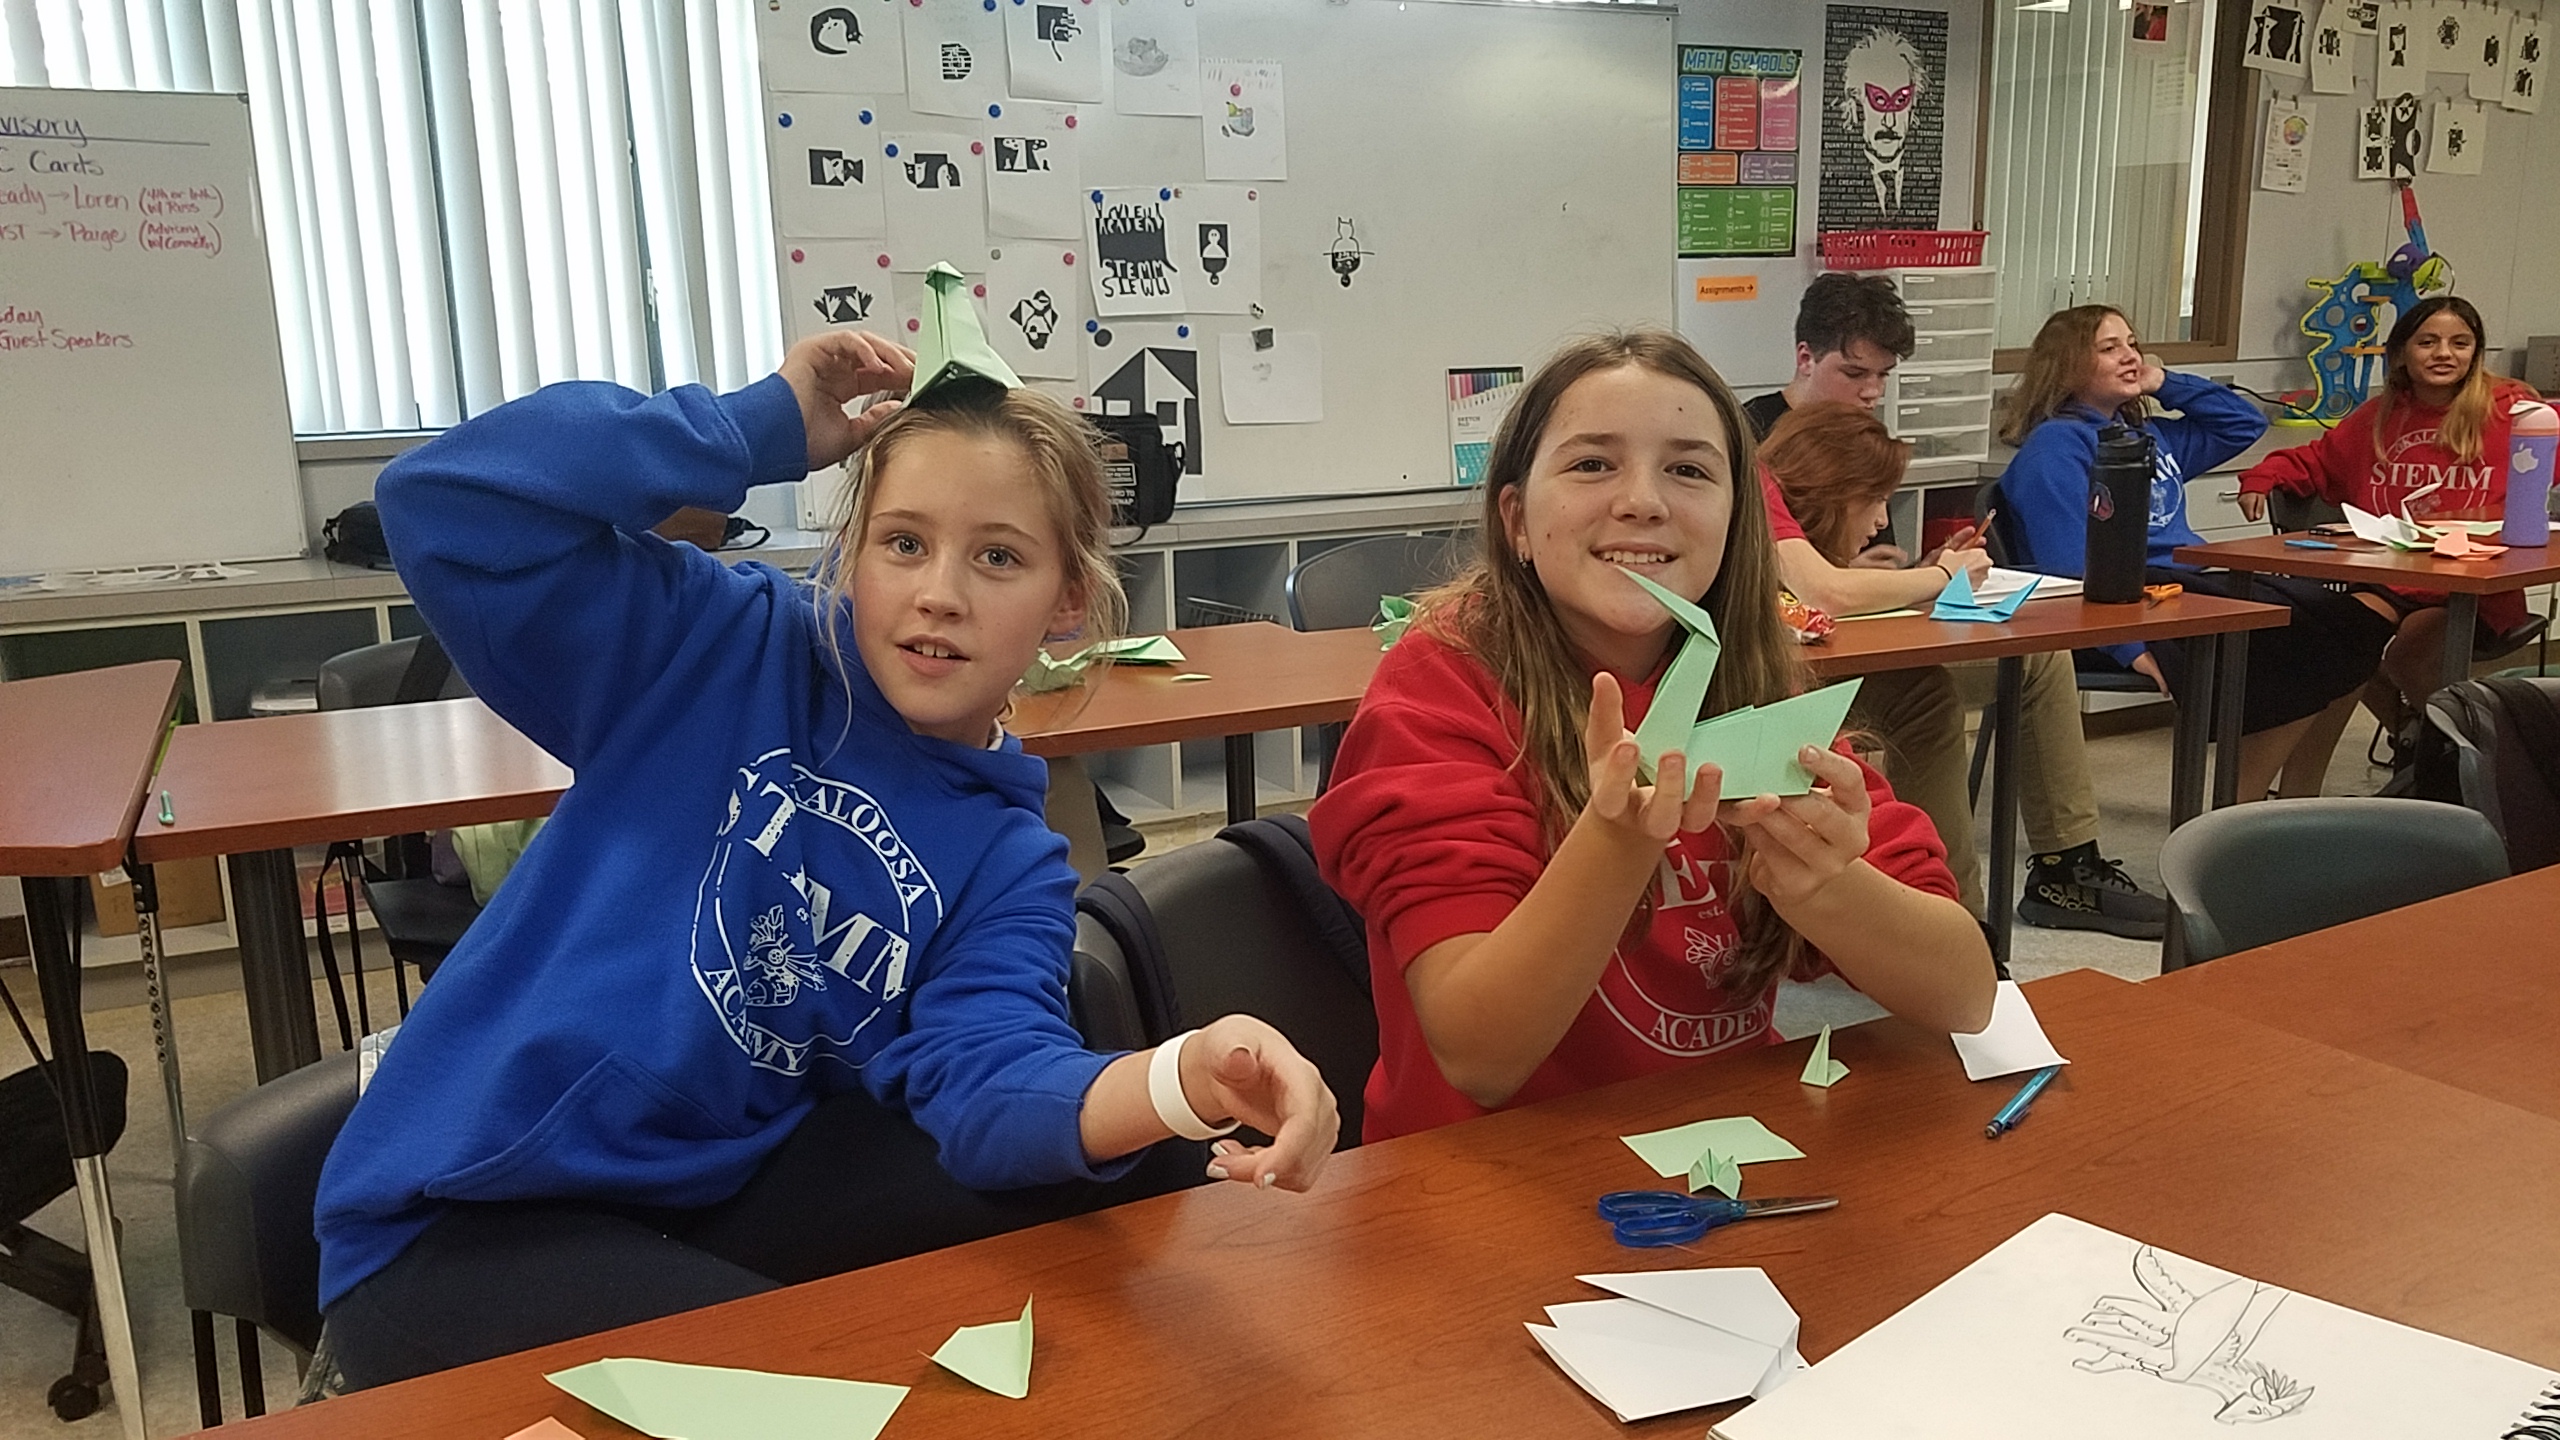 Art club members with origami swans